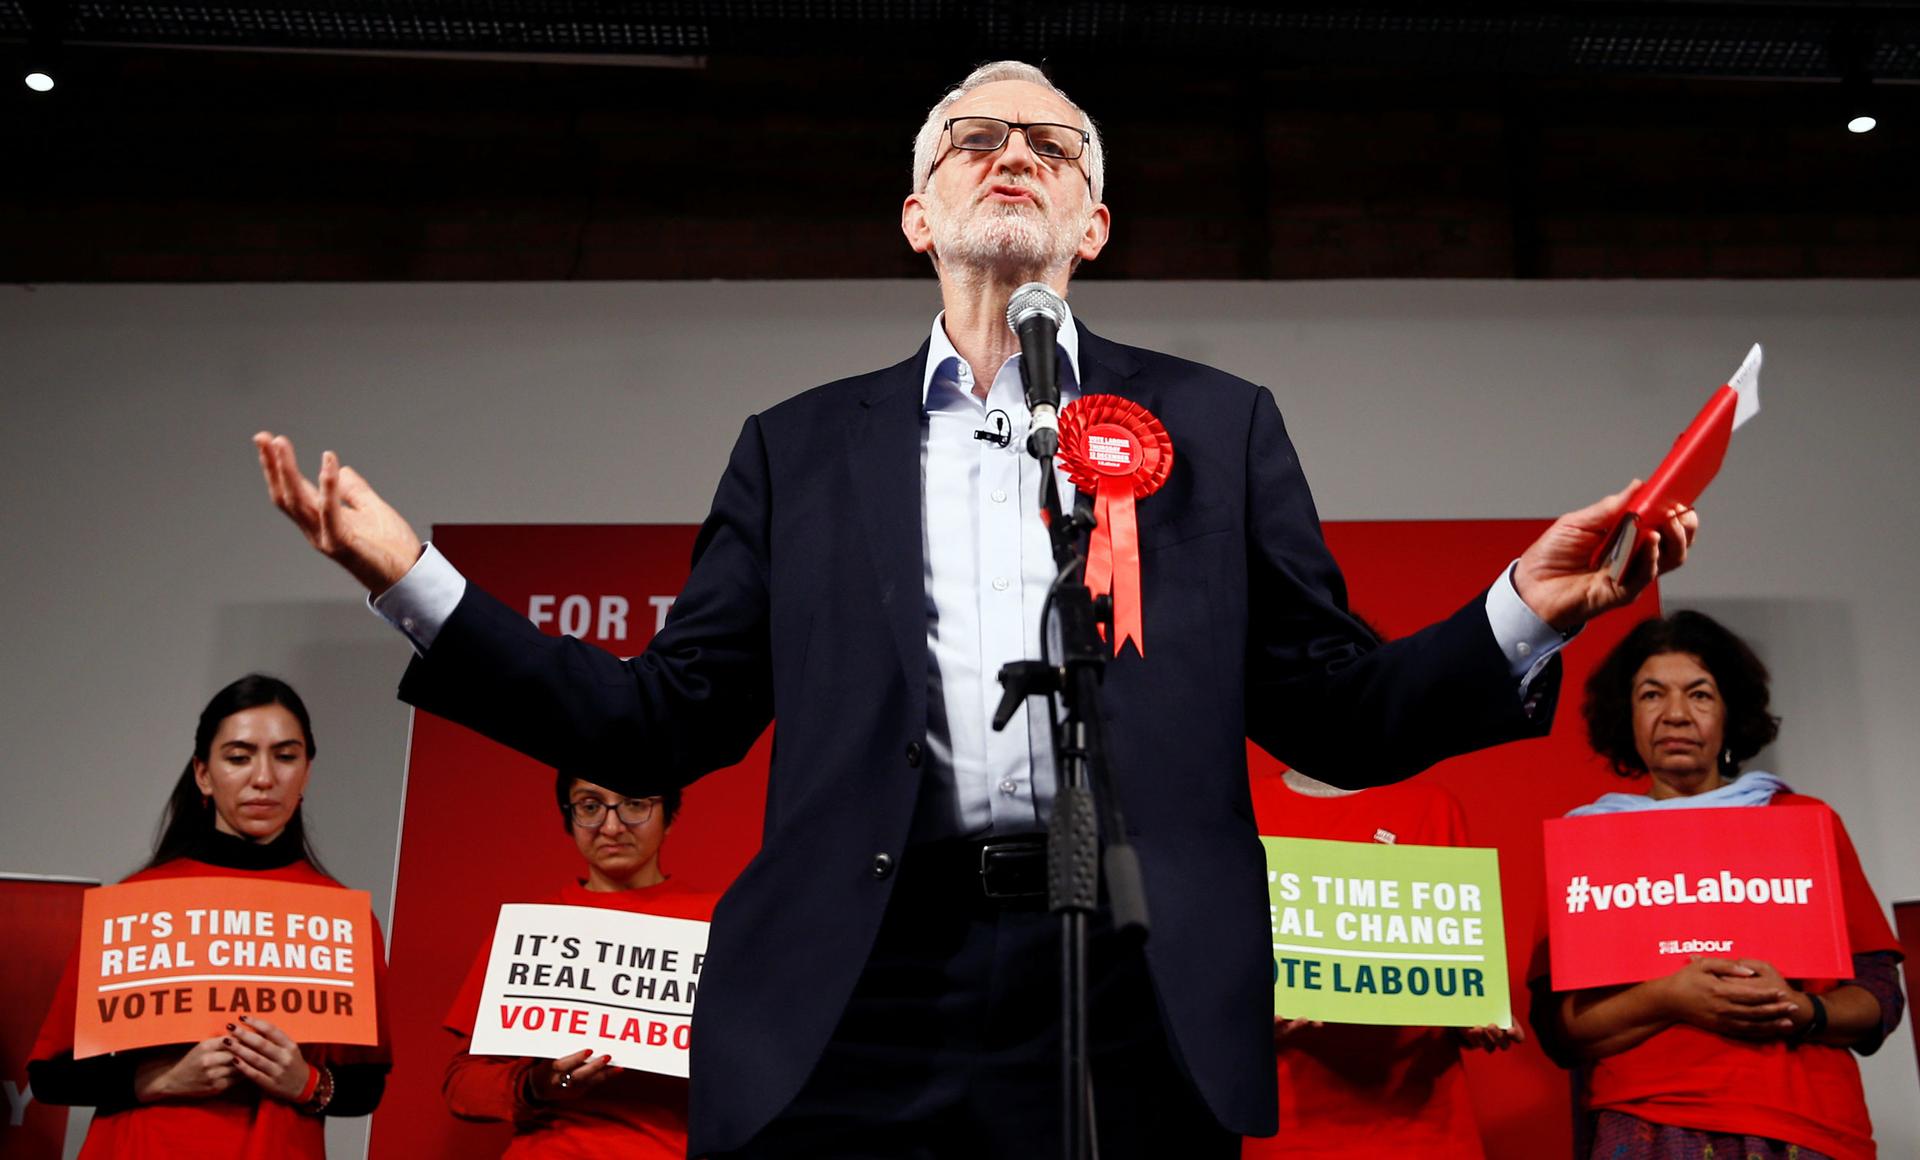 Britain's opposition Labour Party leader Jeremy Corbyn is shown standing a microphone wearing a large red ribbon and holding a red book.